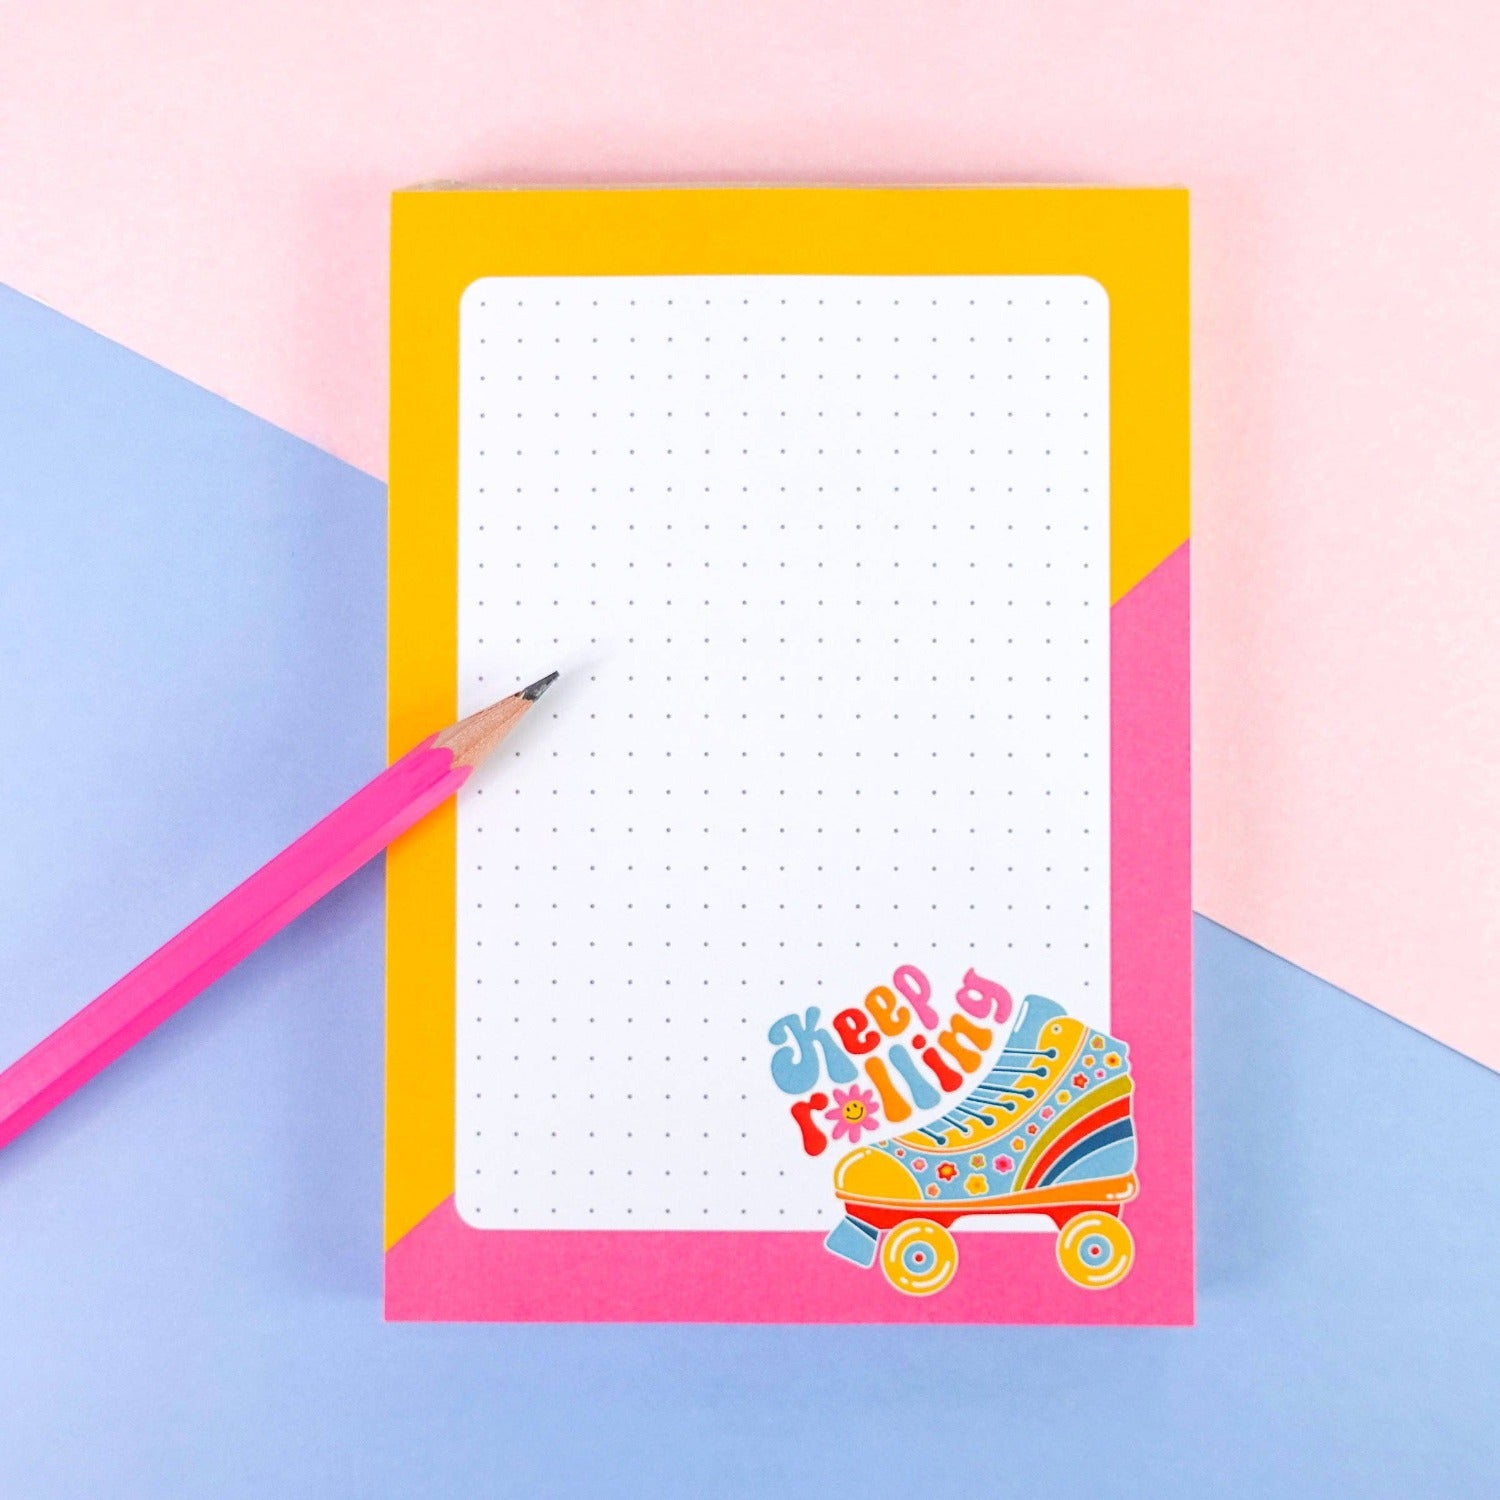 colourful notepad with roller skate design A6 size